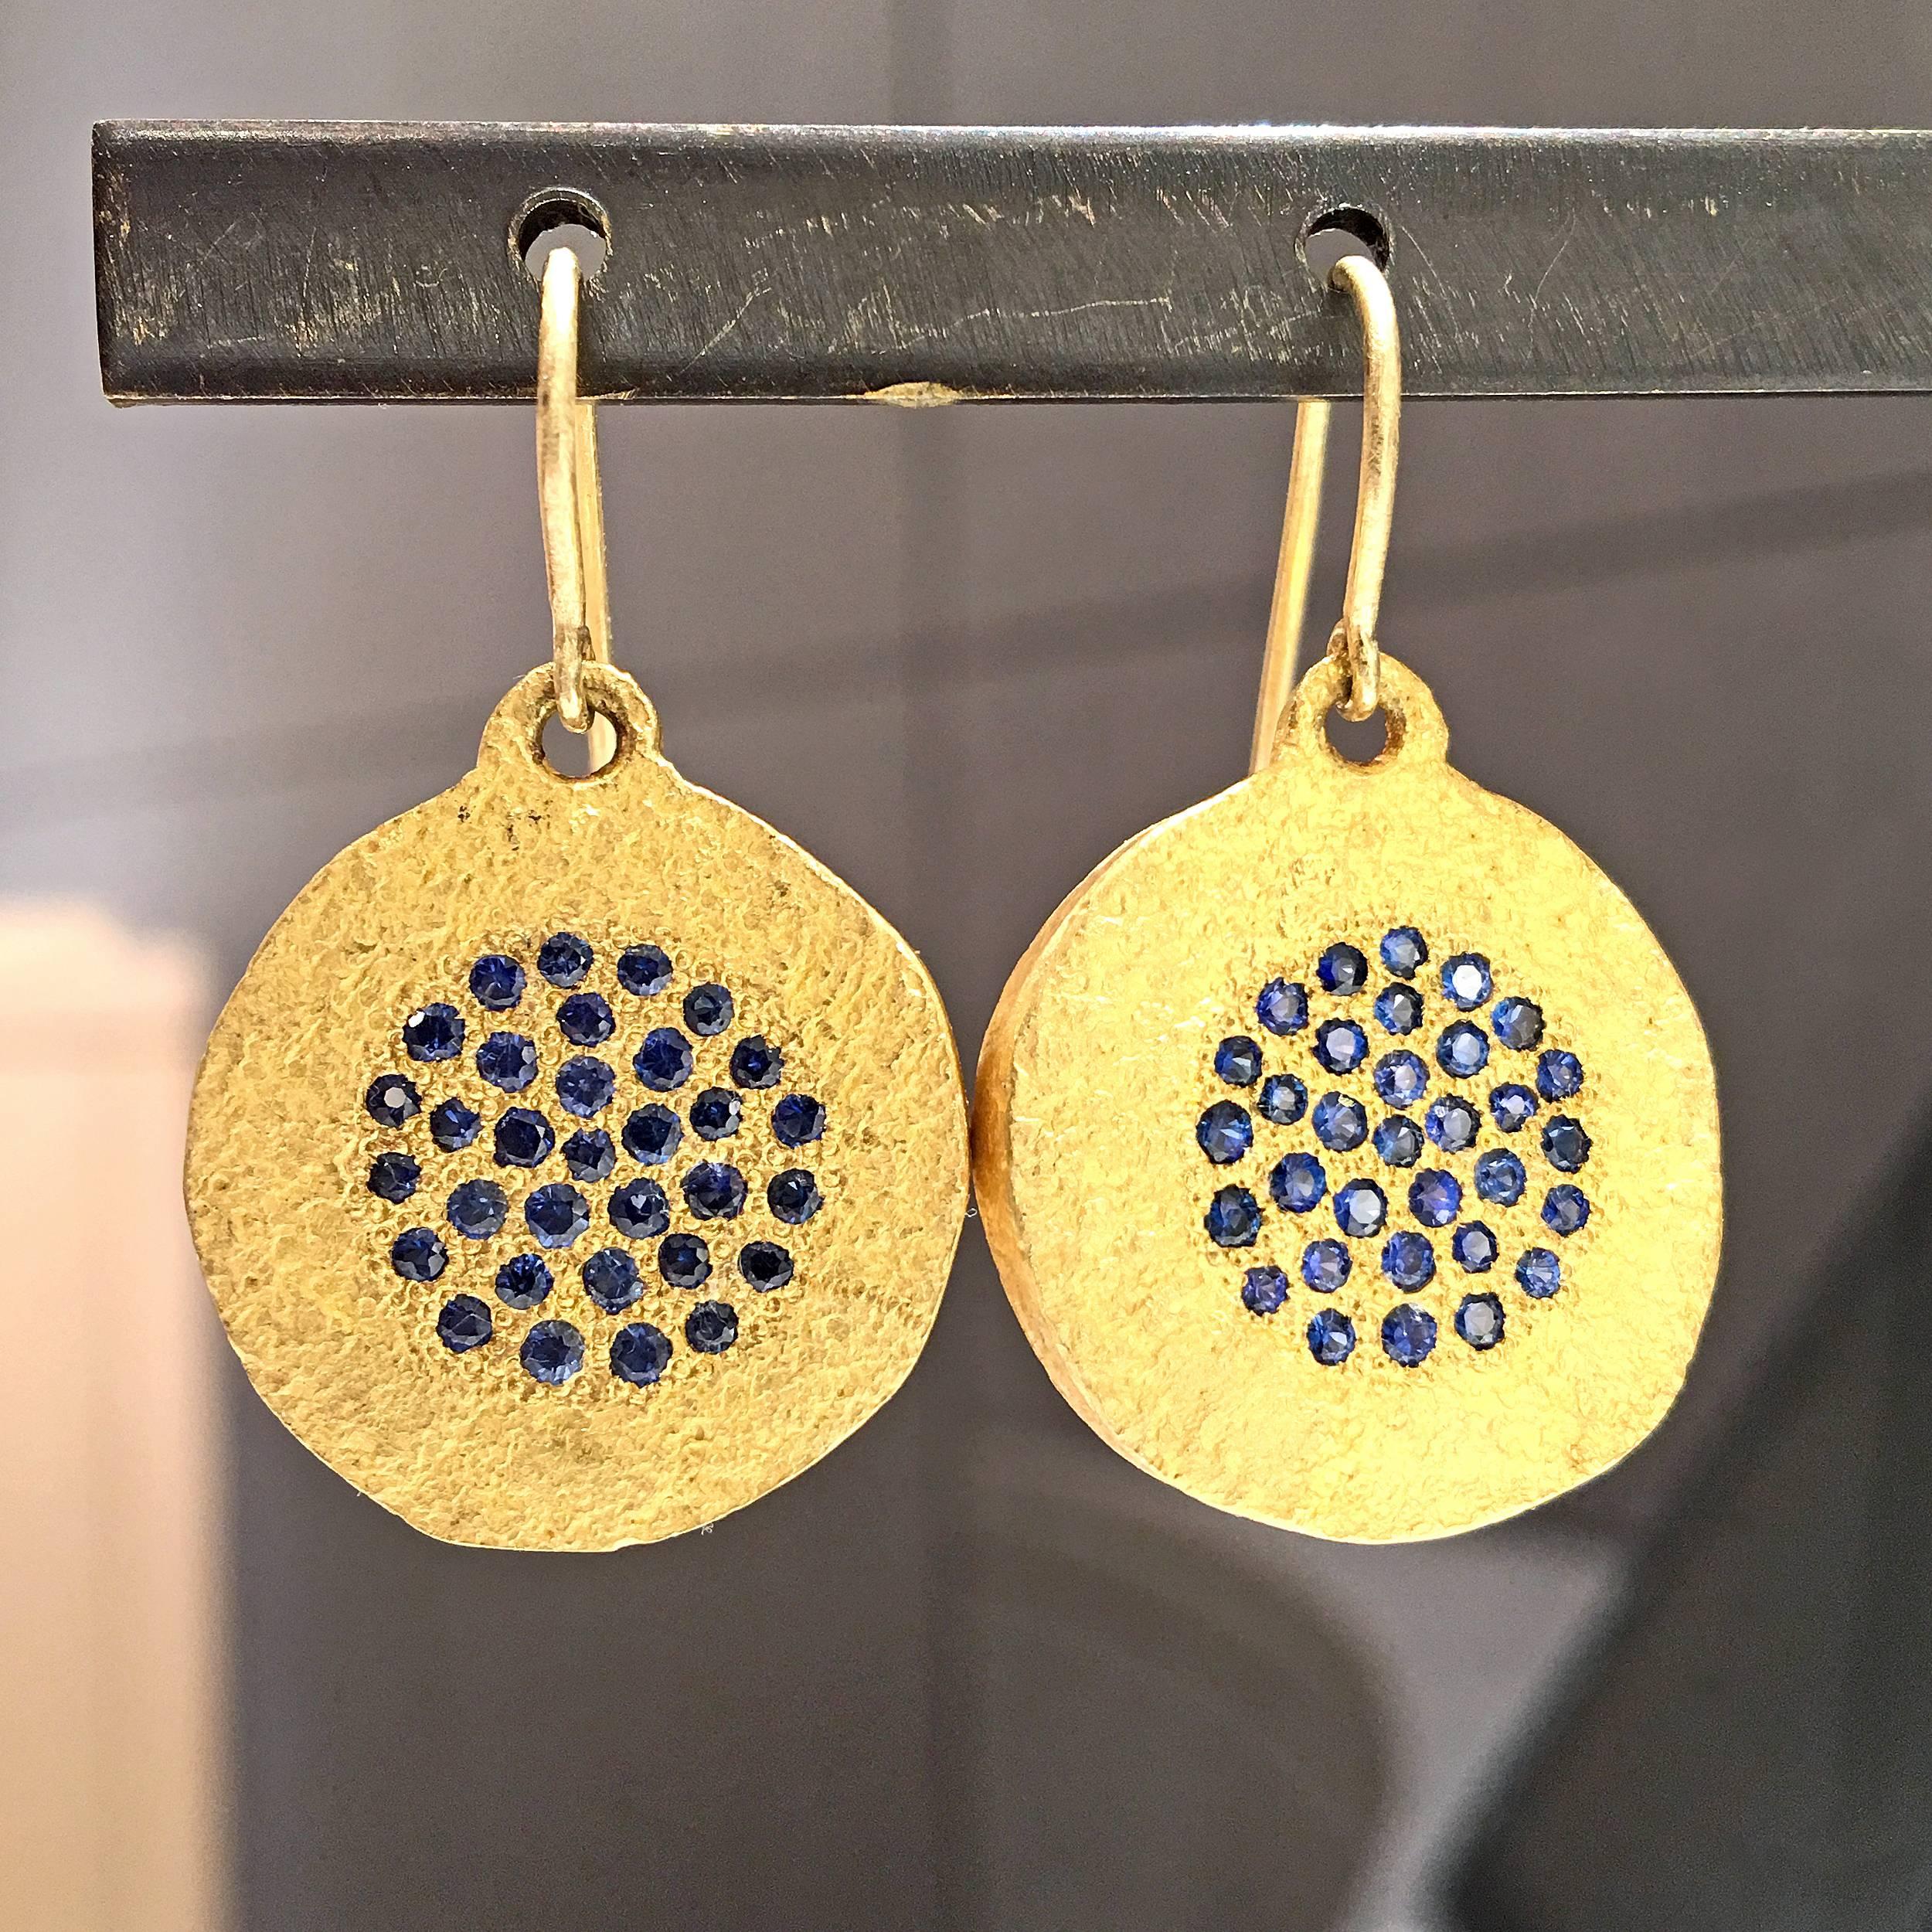 Coin Drop Earrings handcrafted by jewelry artist Devta Doolan in highly-textured 22k yellow gold featuring an array of exceptional-quality shimmering blue sapphires and dangling from handmade gold ear wires. 

Stamped 22k / 2015 with the artist's